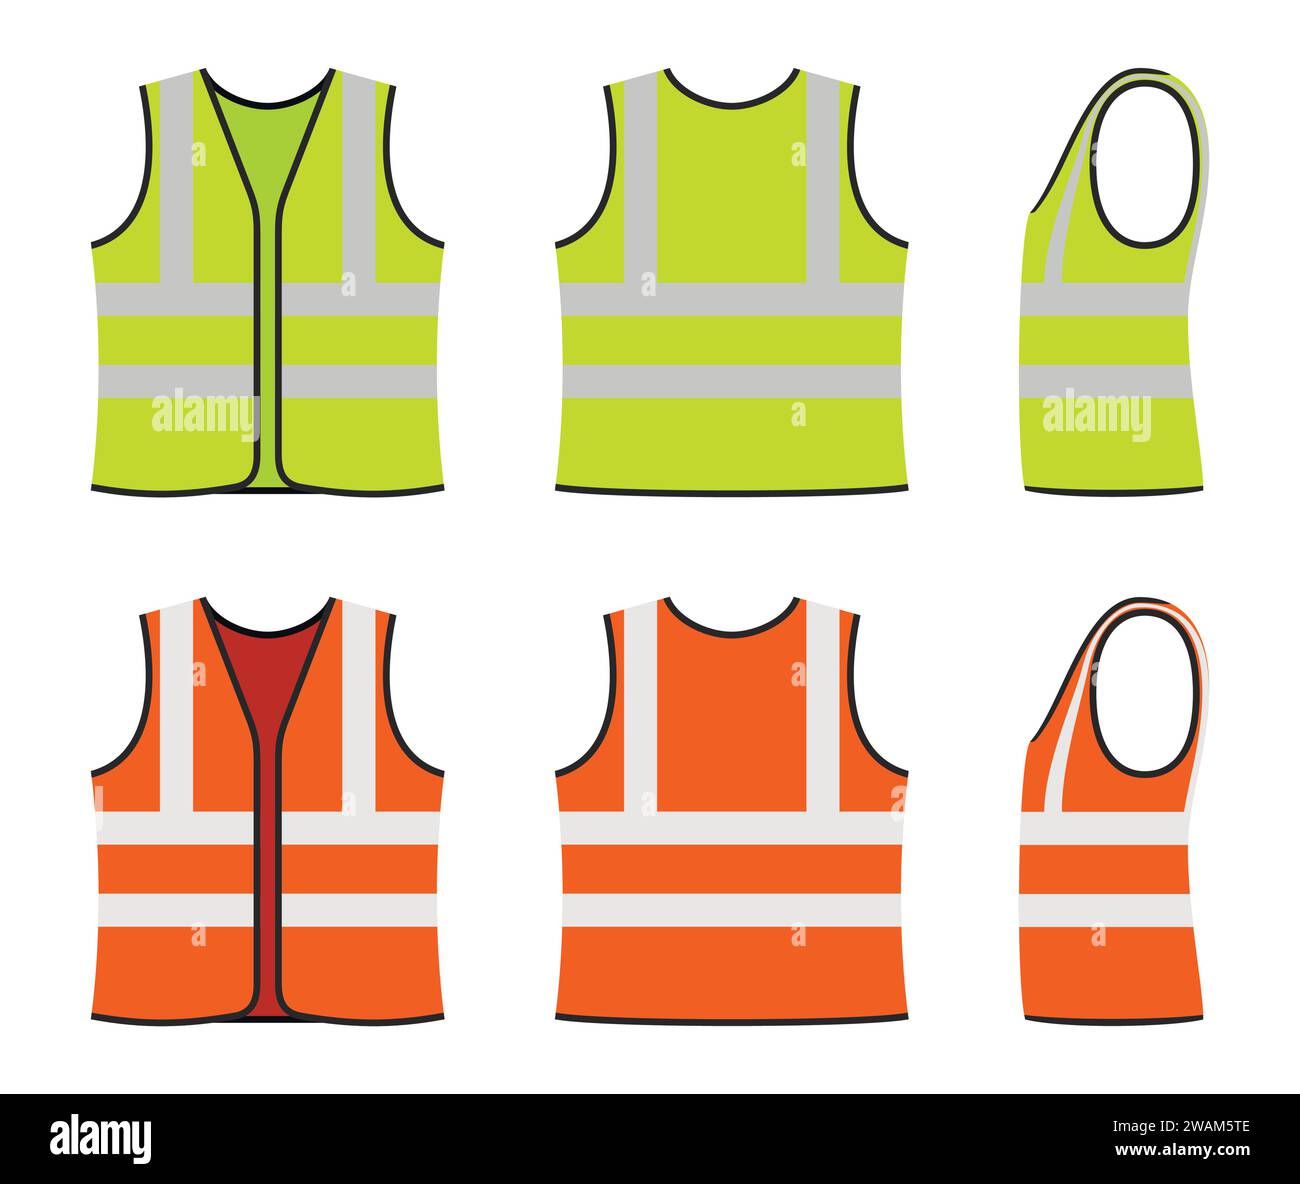 Set of orange and yellow safety vests isolated on white background ...